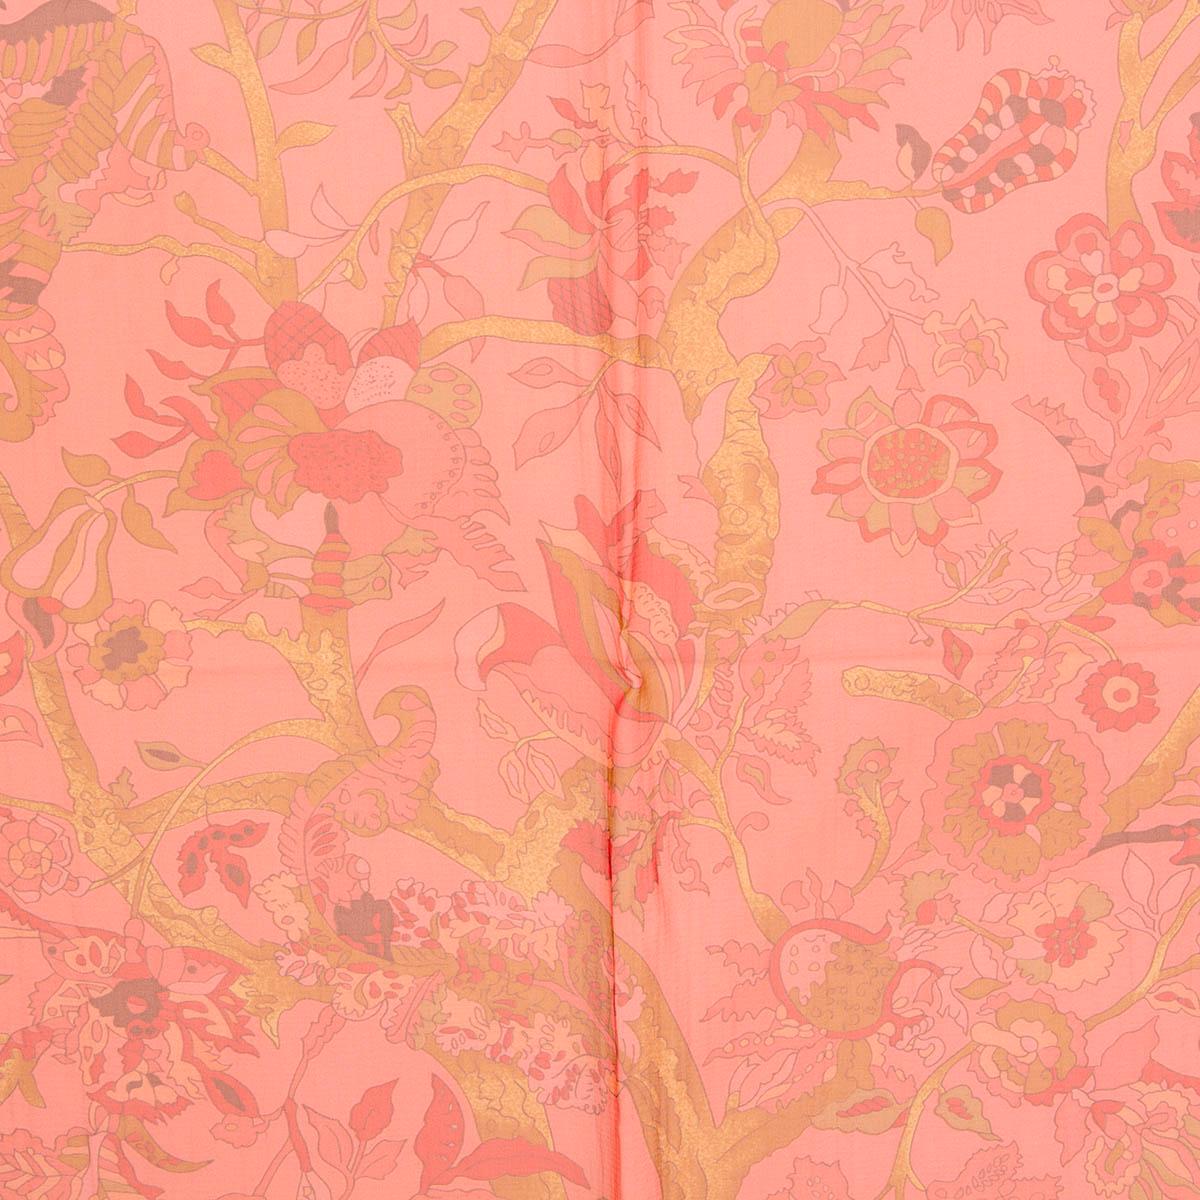 100% authentic Hermès Fantaisies Indiennes 140 Mousseline scarf by Loic Dubiegon in coral silk chiffon (100%). Features an elaborate design of florals, animals and people on a background of coral pink with details in ochre, brown and pink. Has been